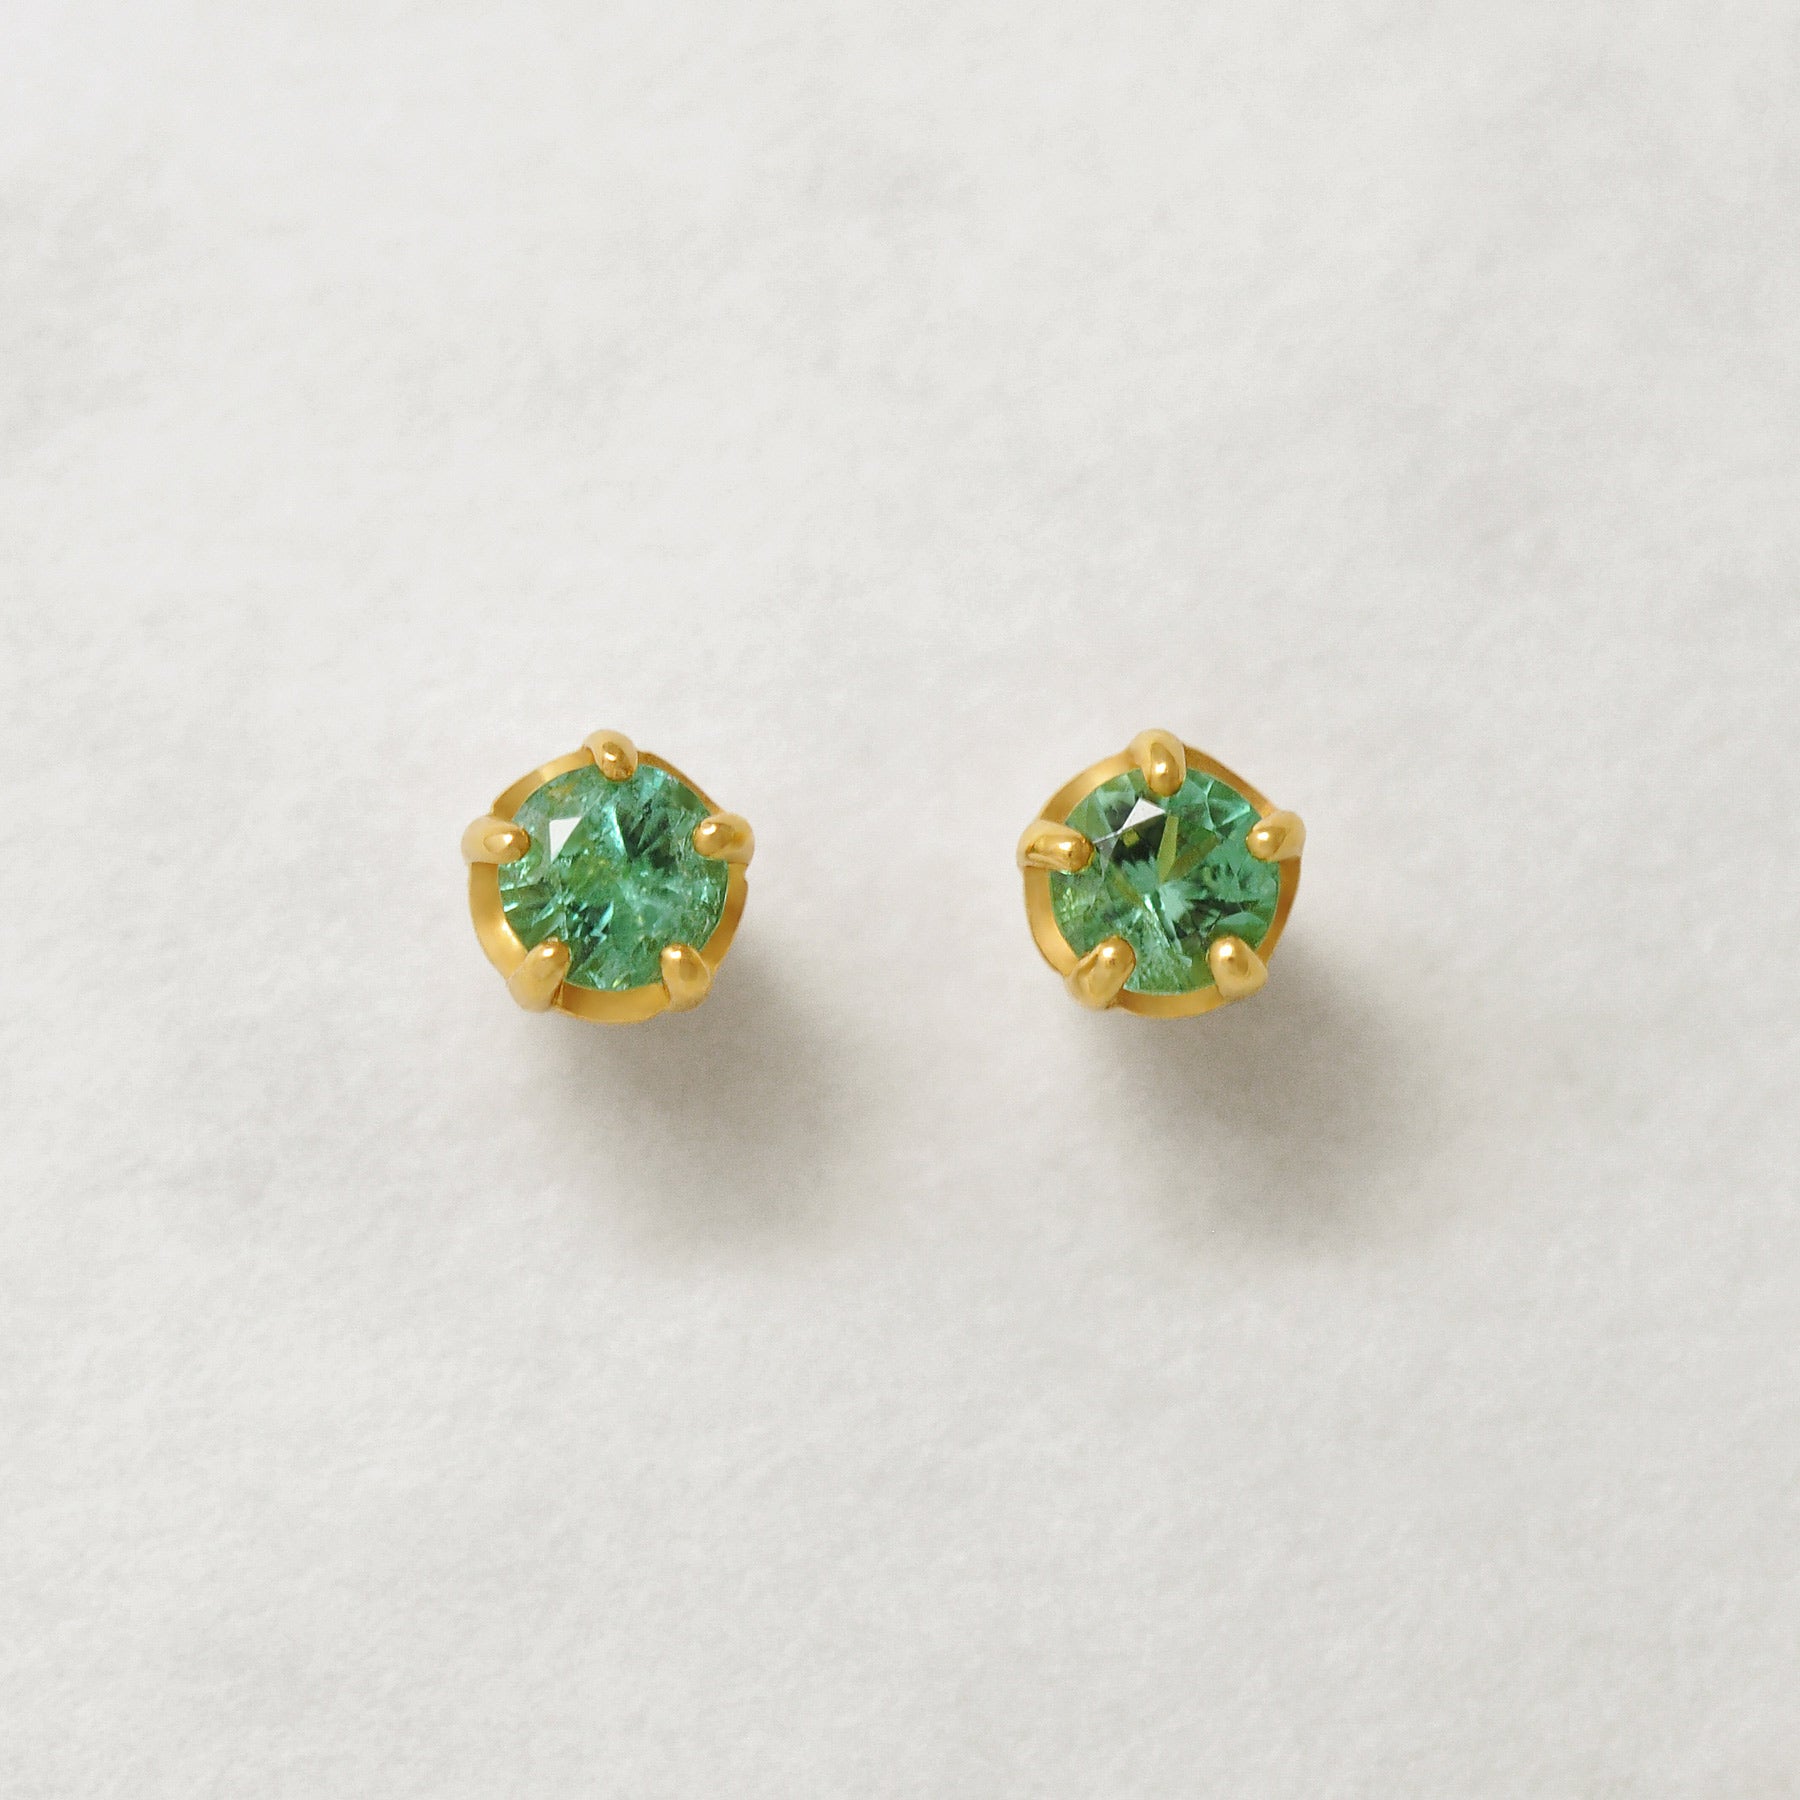 [Second Earrings] 18K Yellow Gold Emerald Earrings (Φ3mm) - Product Image